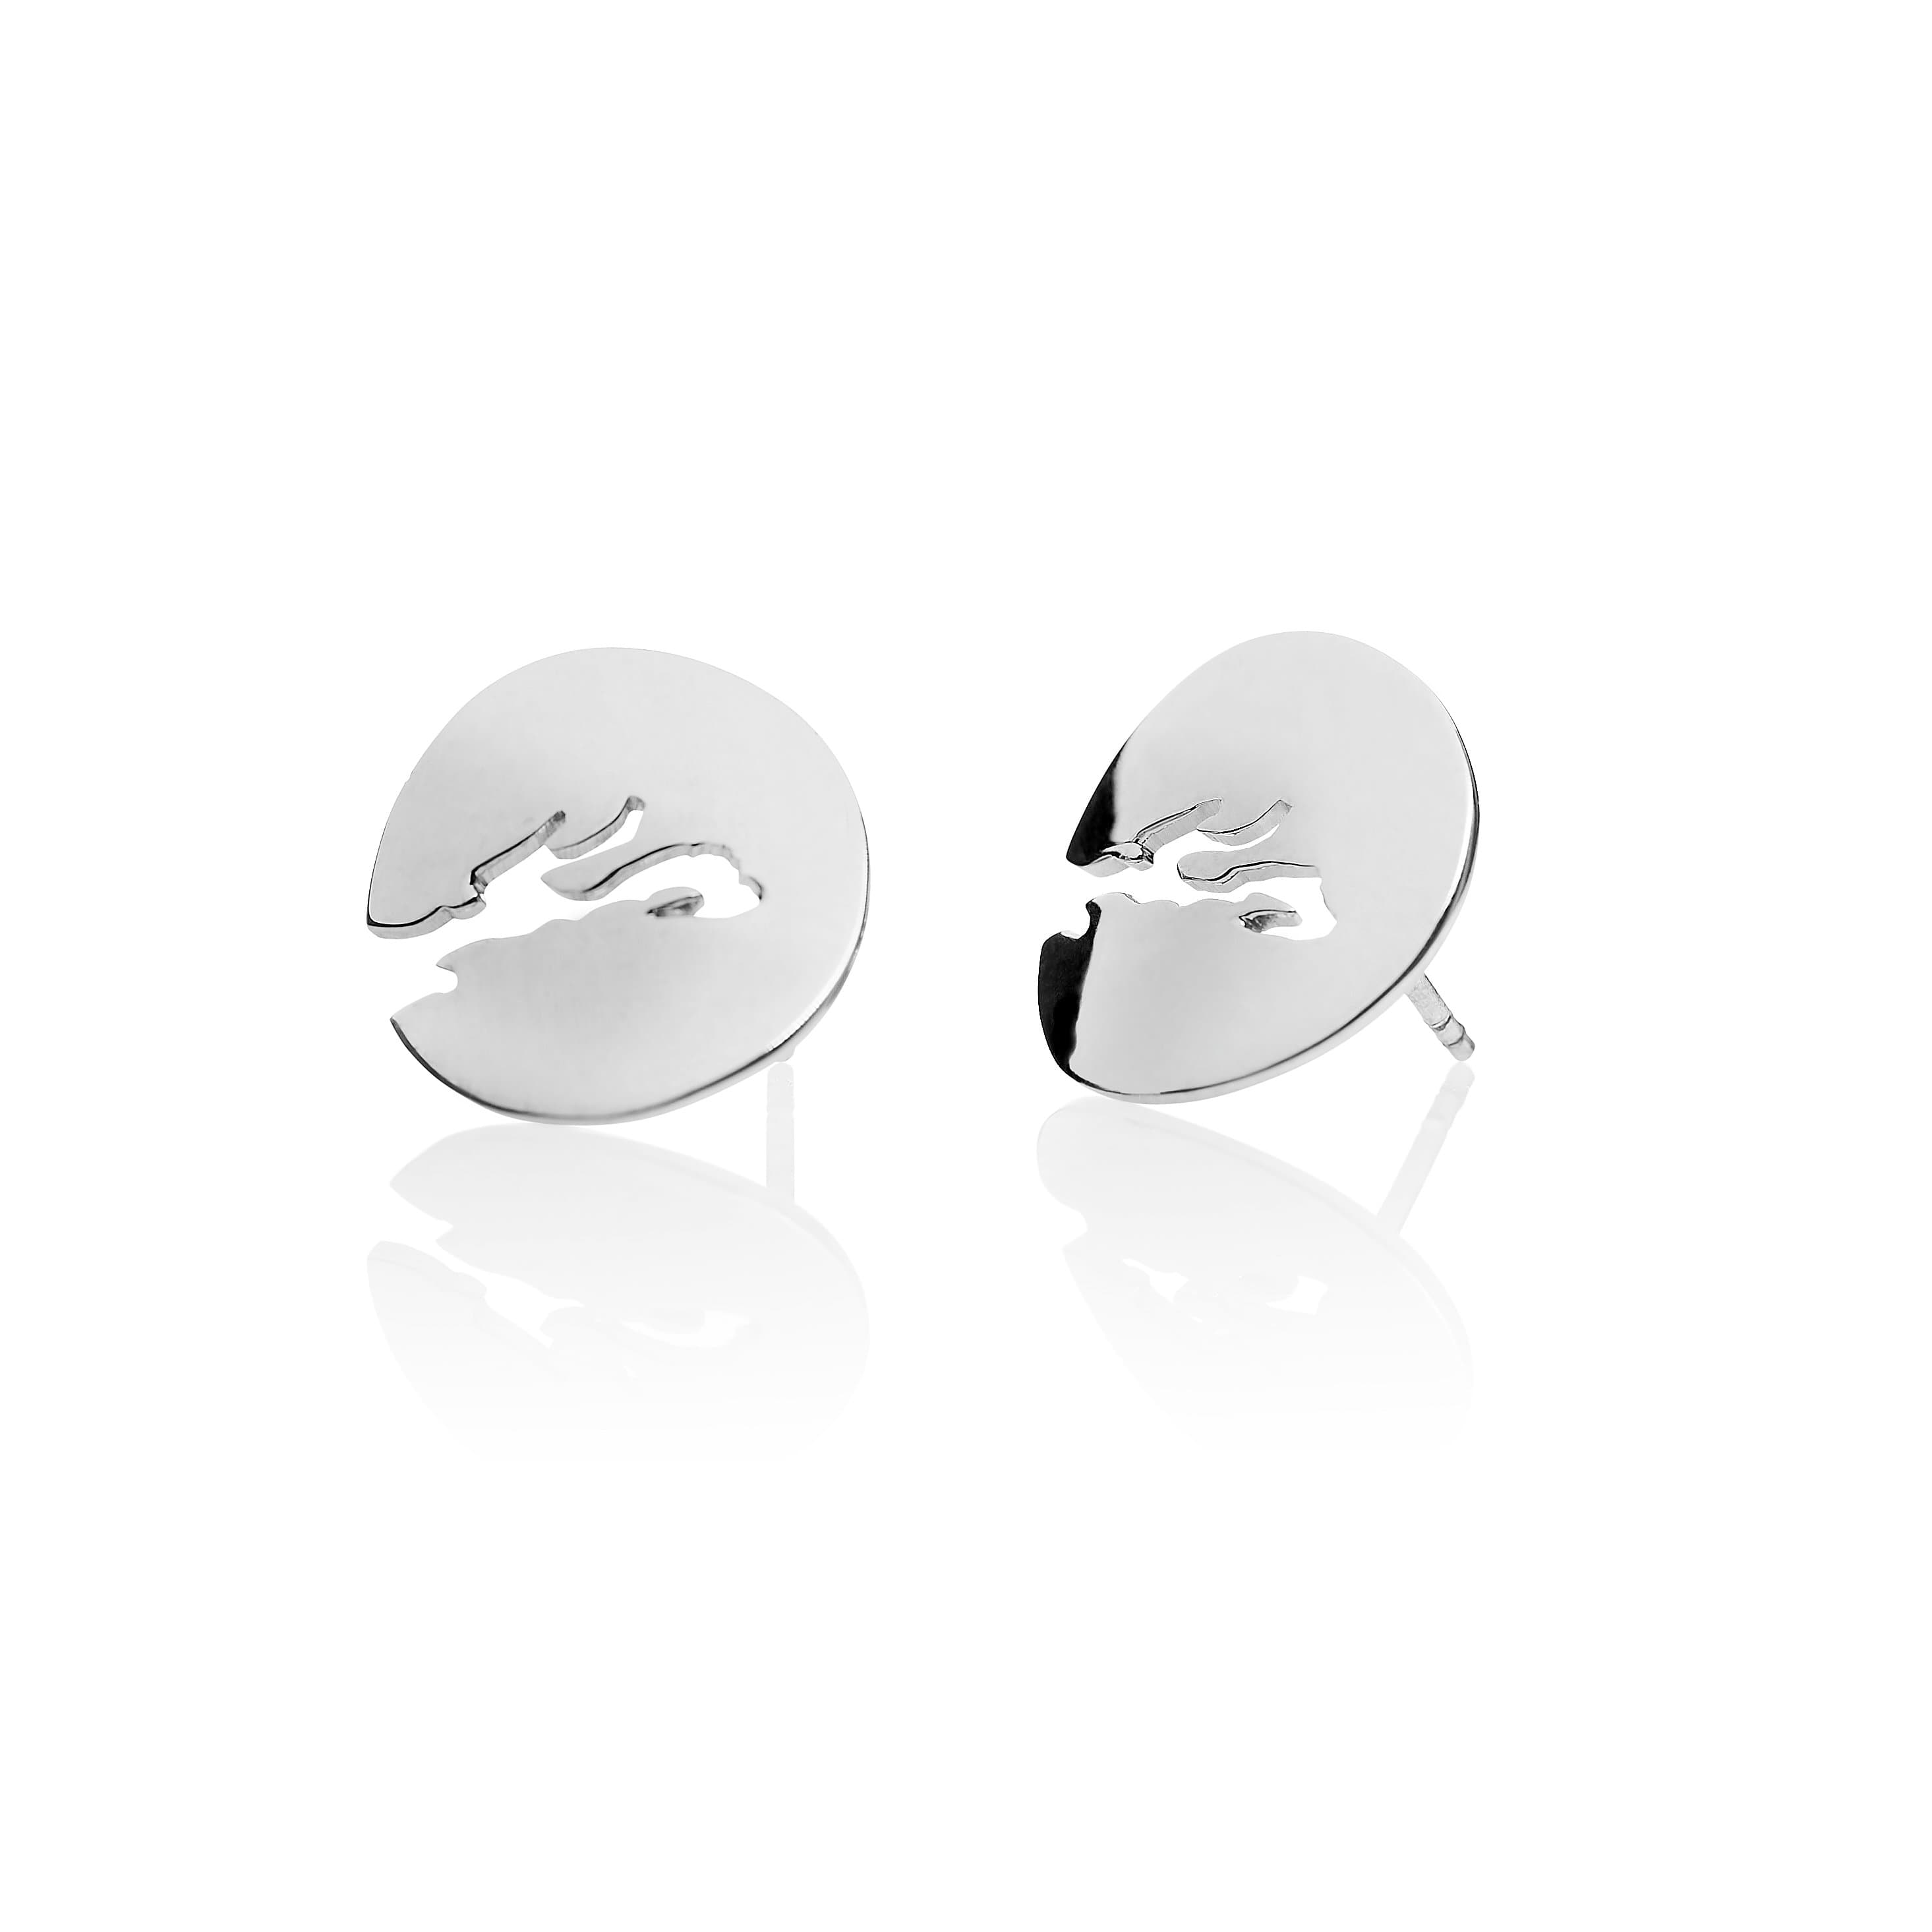 Rounded Oslo fjord silver earrings